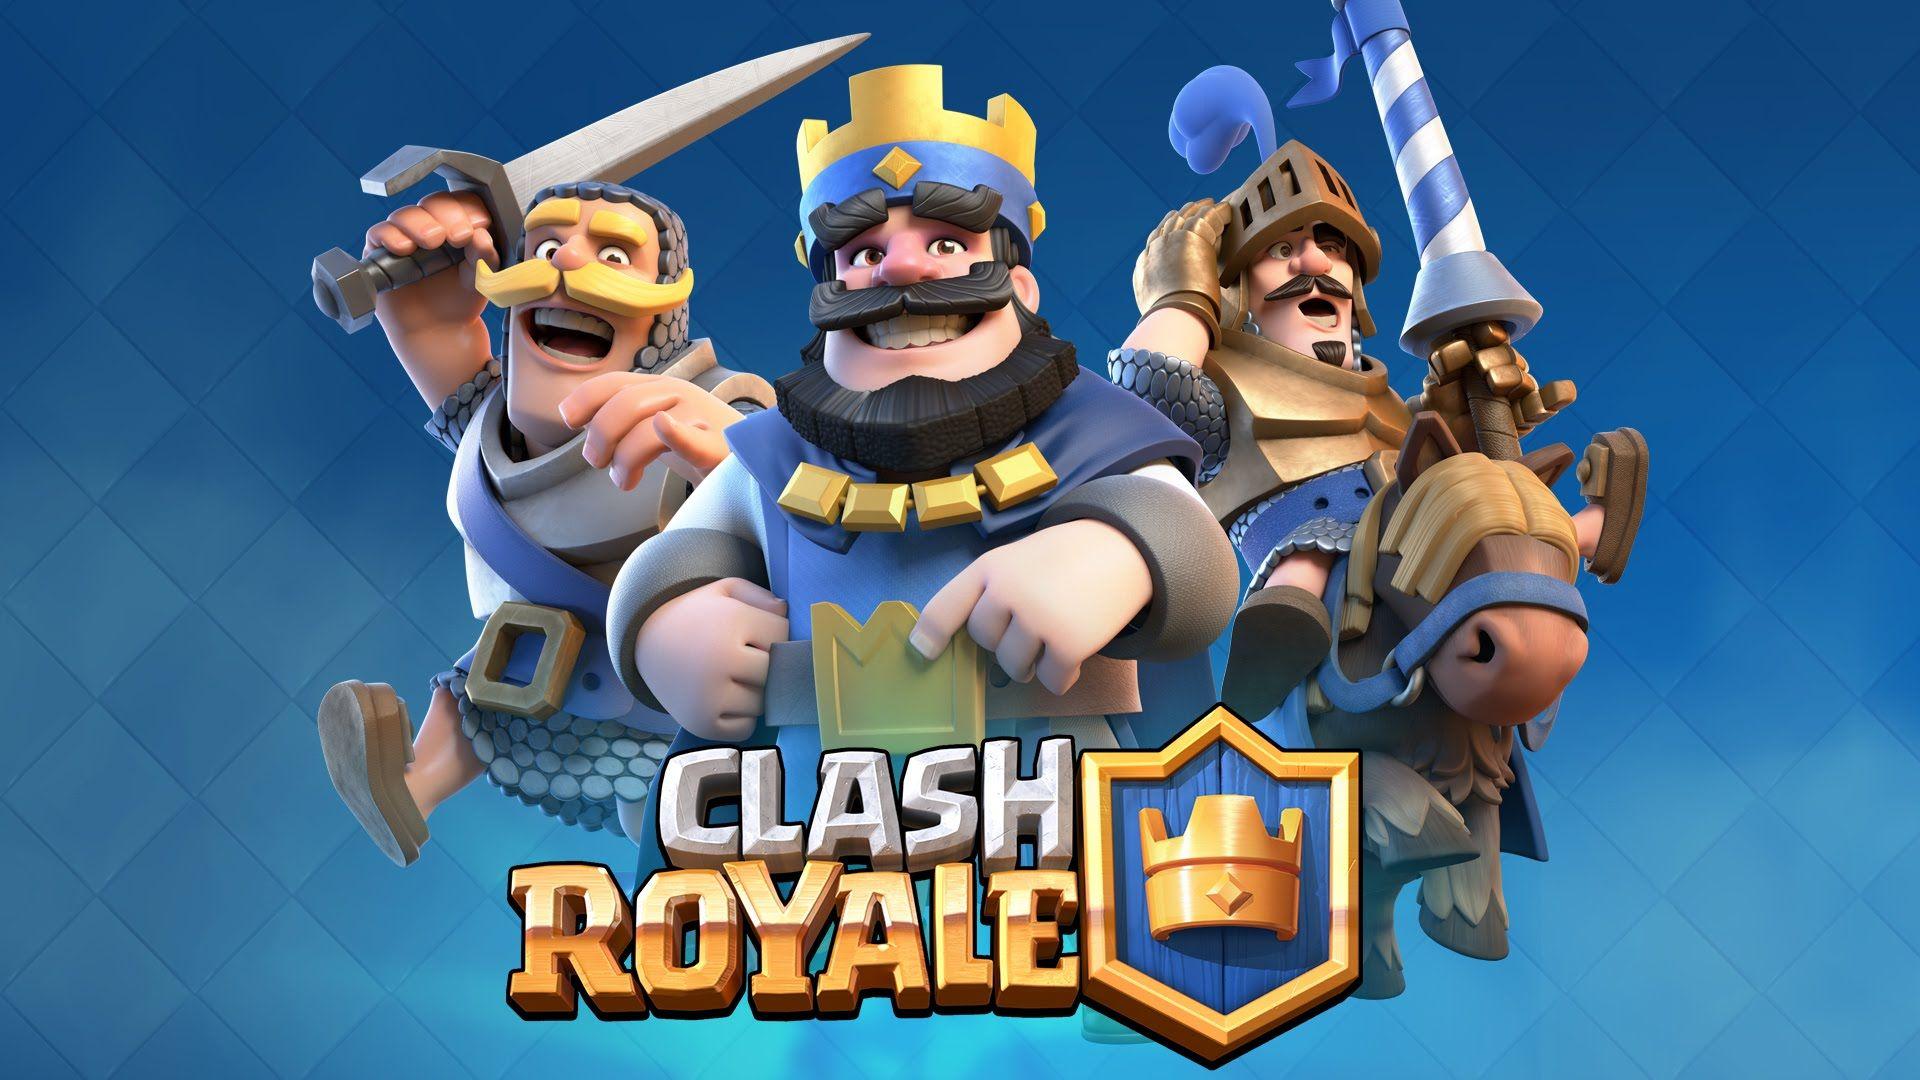 Advanced Clash Royale Tips. On a Screen